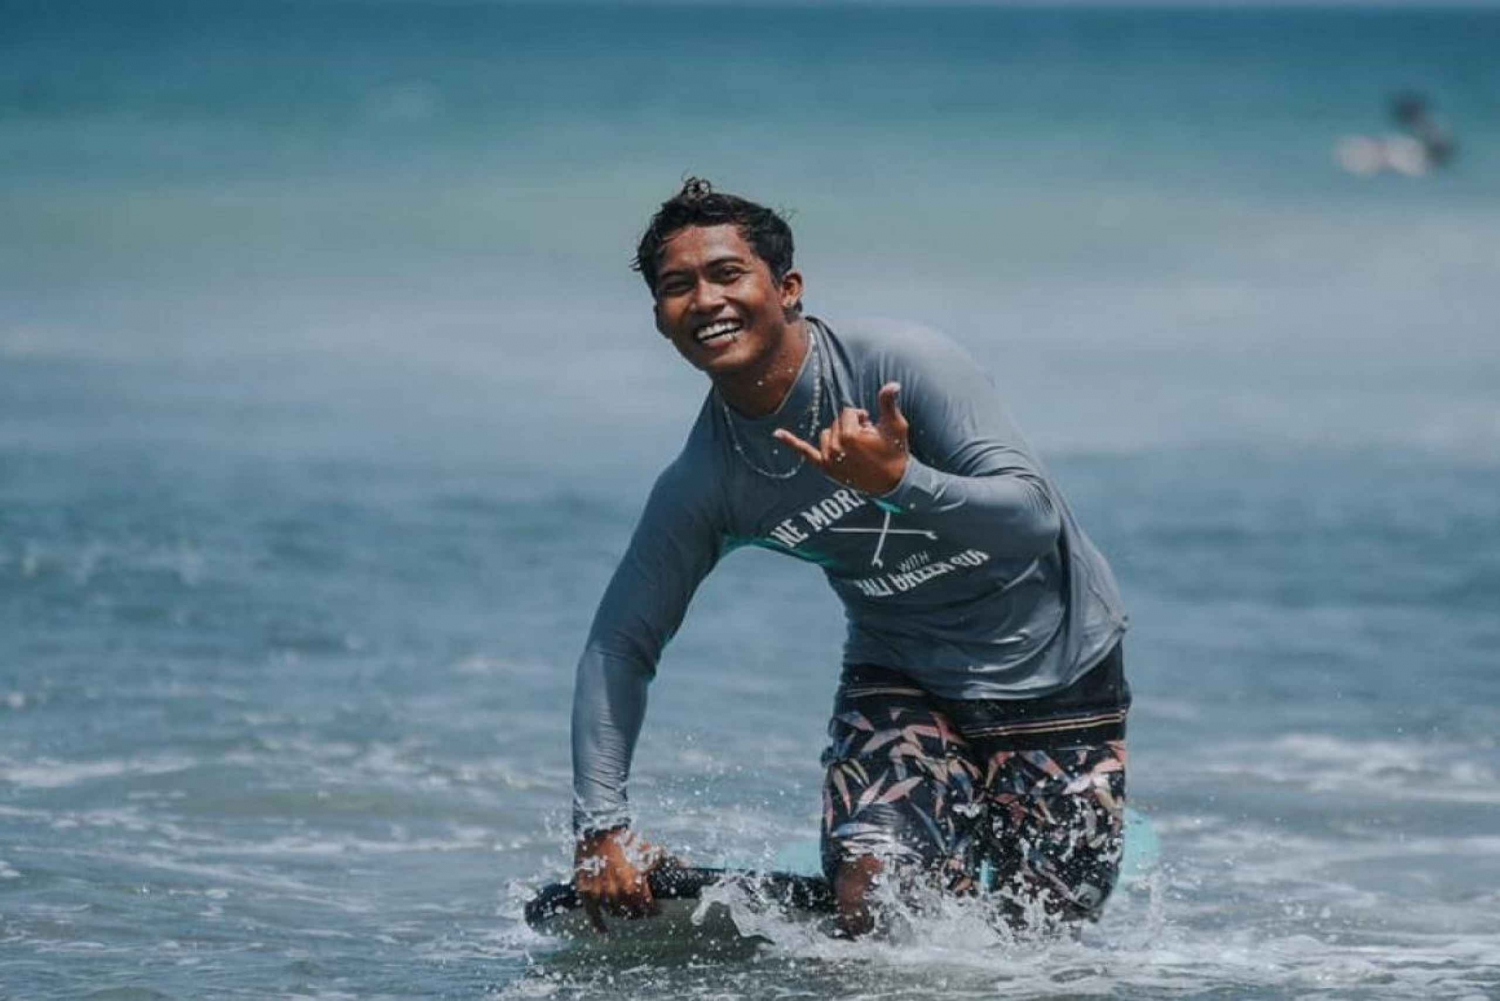 Bali: Surfing Class all Levels in Small Groups or Private